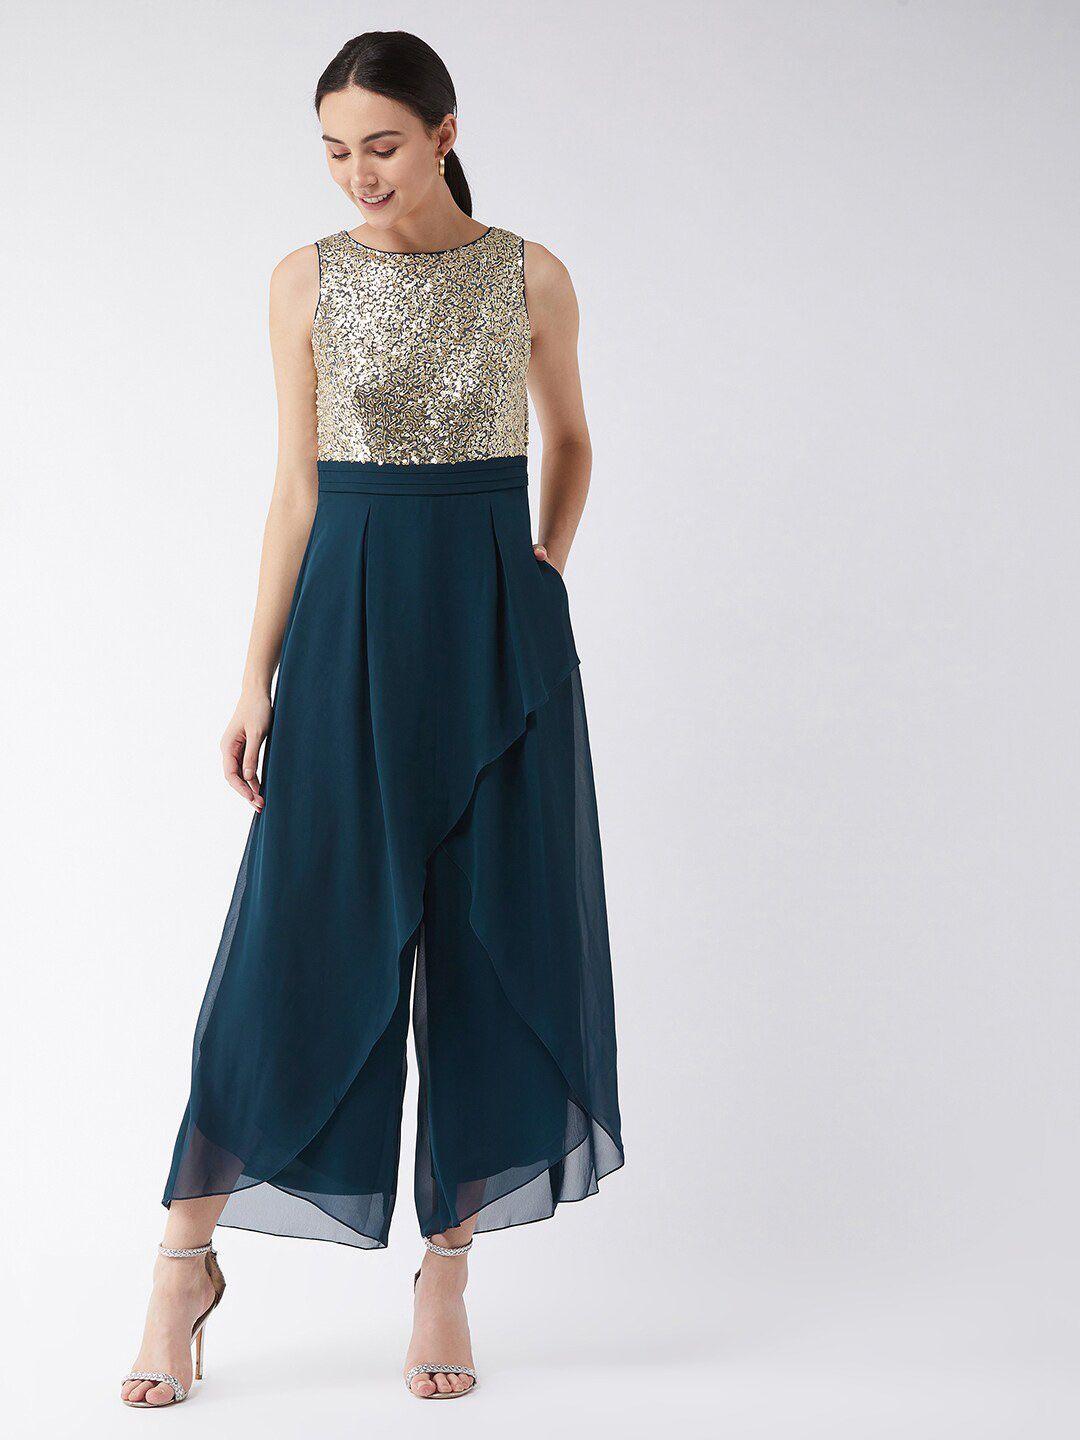 miss-chase-teal-&-gold-toned-sequined-asymmetric-layered-jumpsuit